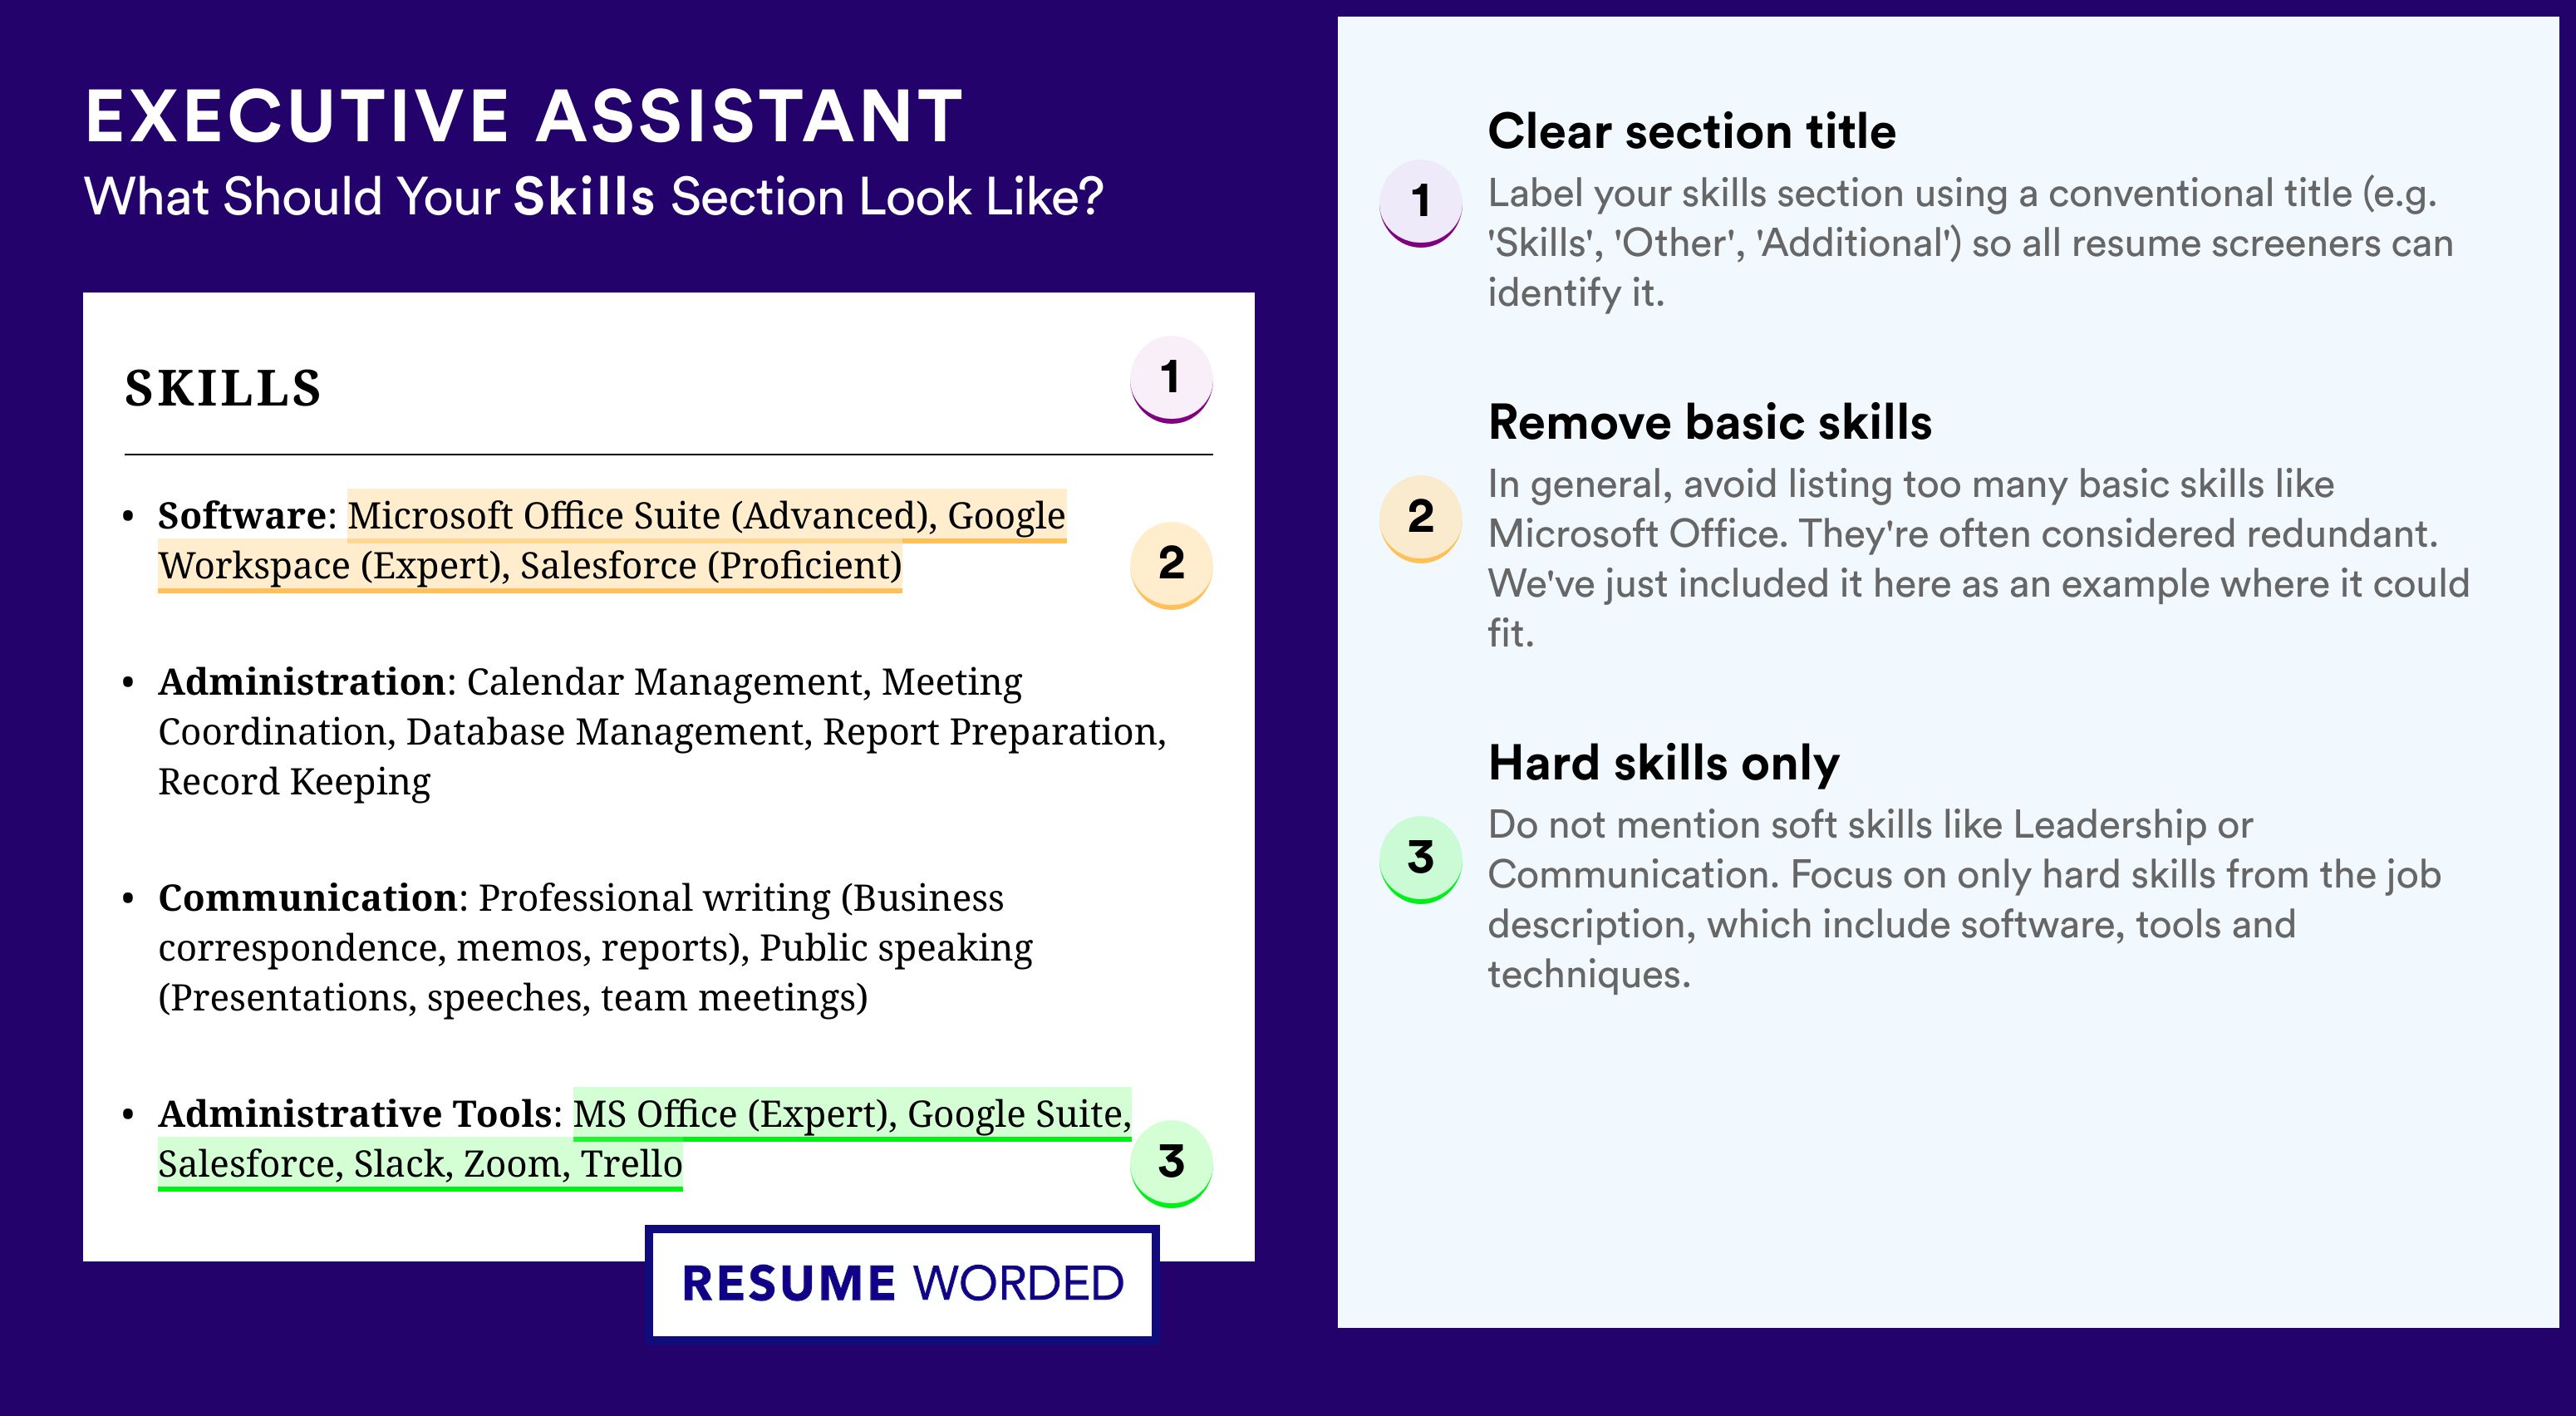 How To Write Your Skills Section - Executive Assistant Roles